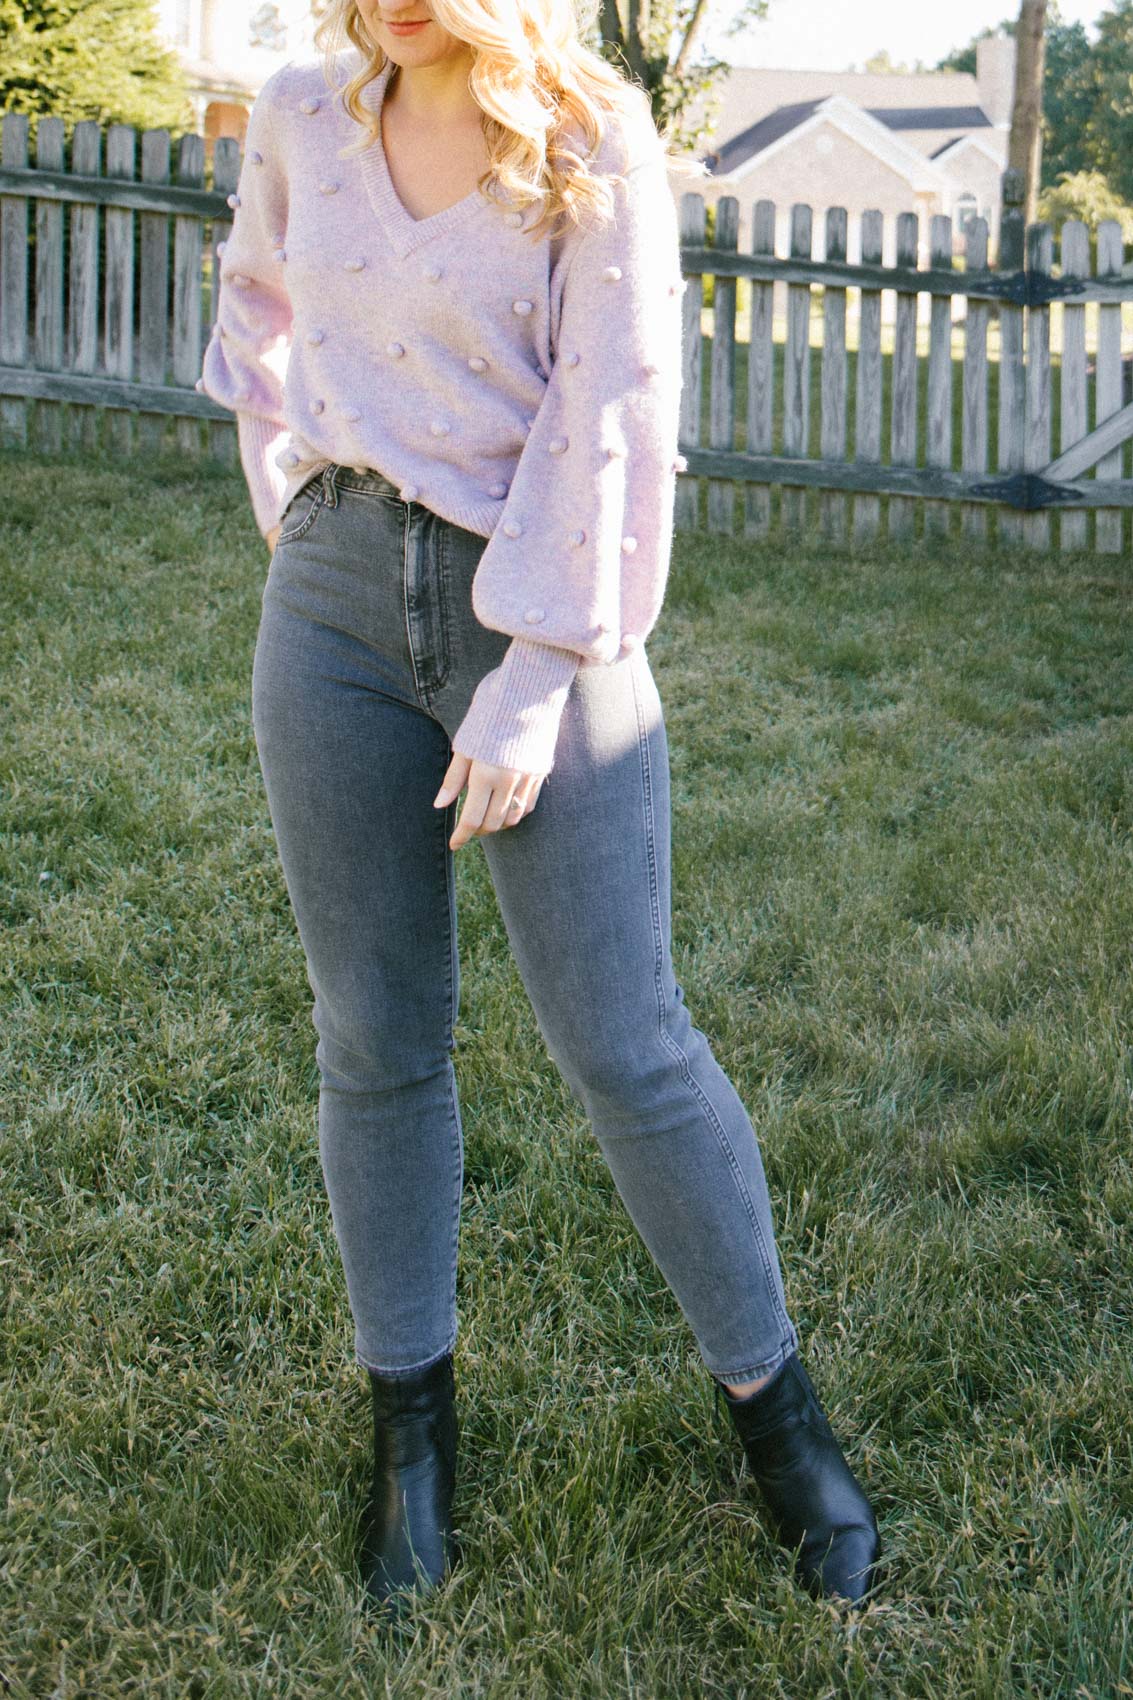 https://allynlewis.com/wp-content/uploads/2020/11/grey-jeans-outfit-purple-sweater-lr-1.jpg